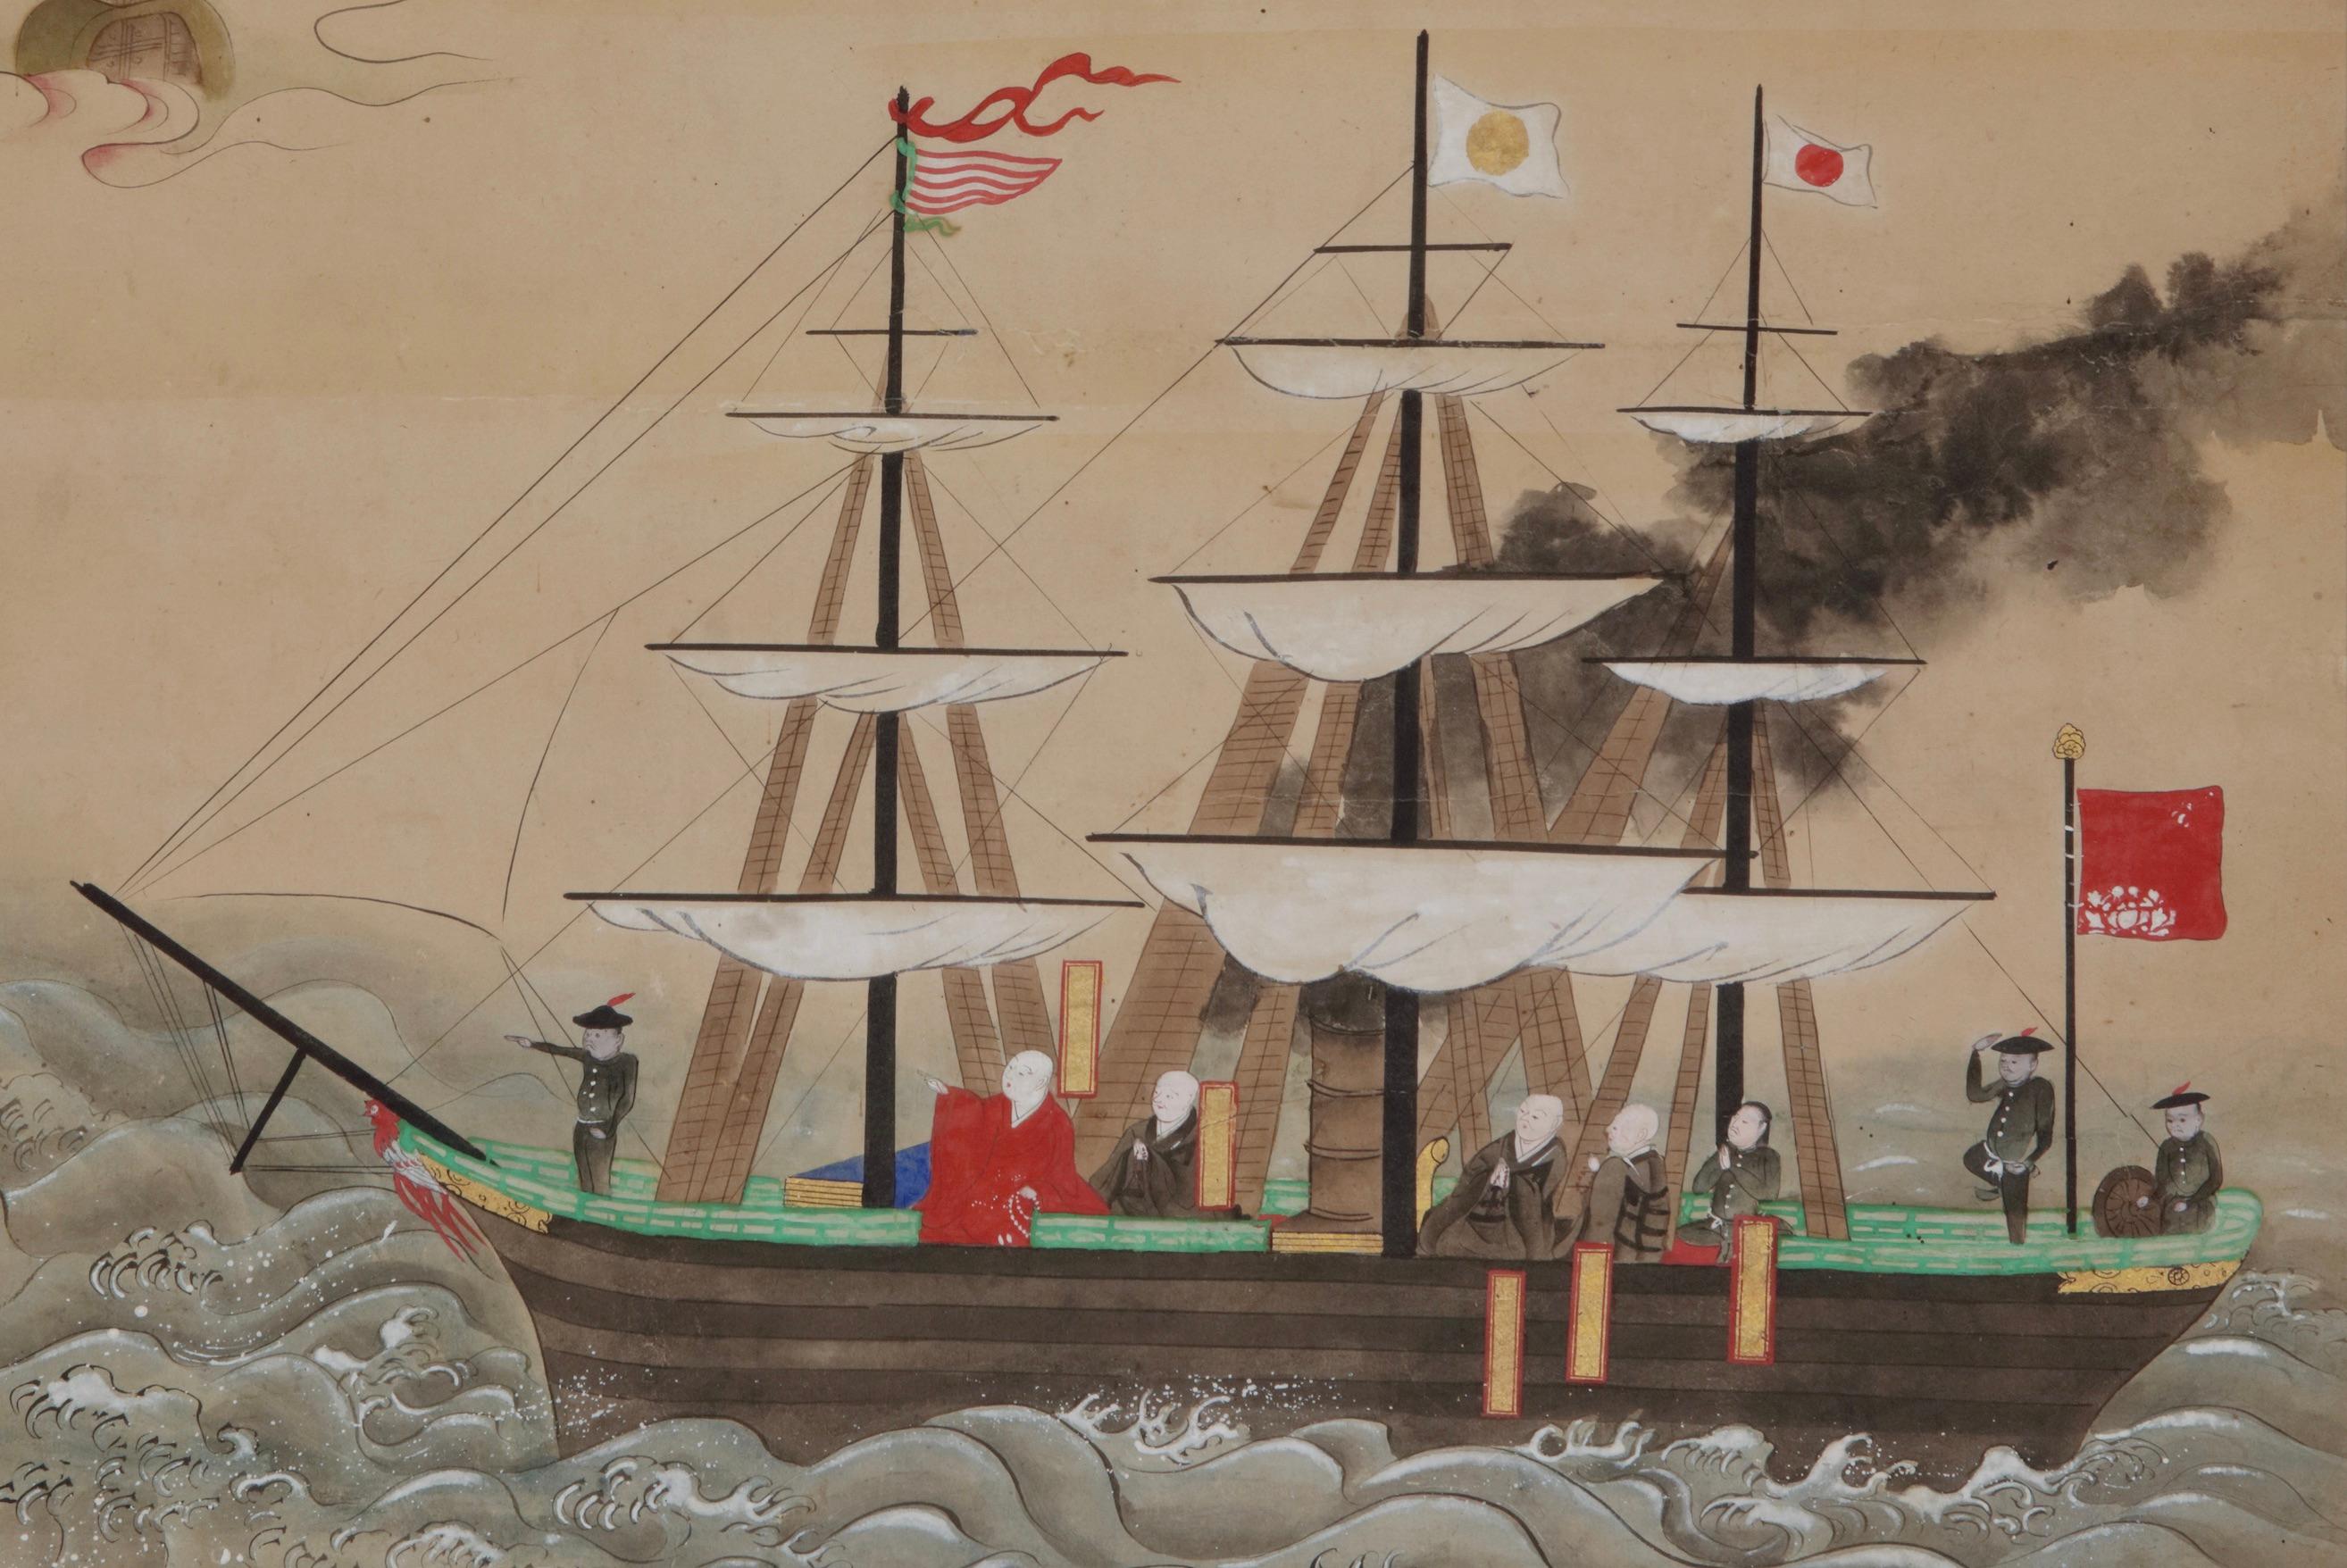 A Japanese painting depicting Commodore Matthew Perry’s flagship USS Mississippi bringing the coffin with the remains of US marine private Robert Williams who died while serving on the USS Mississippi in Japan, March 6, 1854, aged 21, to the